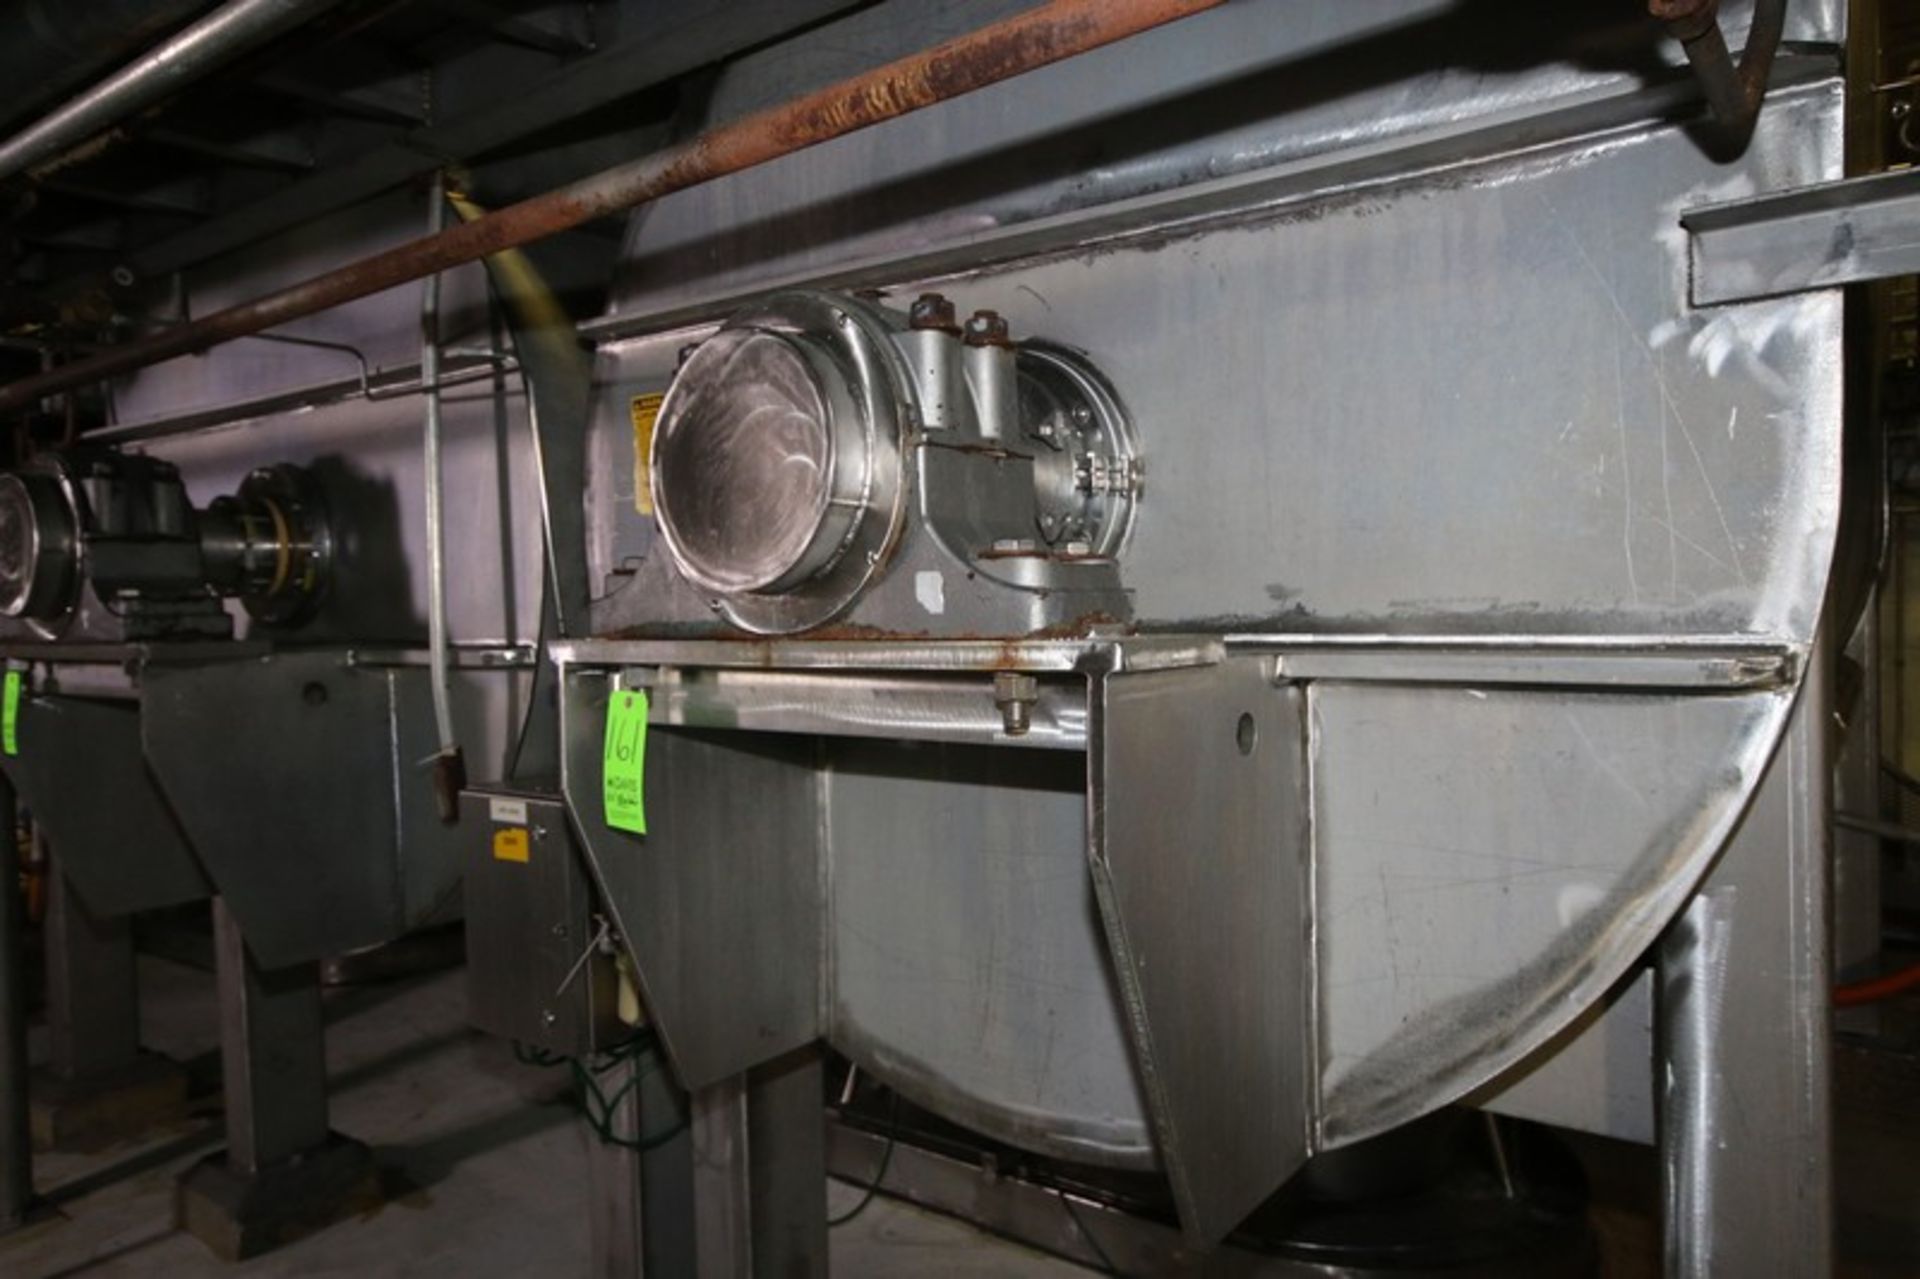 Marion S/S Paddle Blender, M/N SPX144, Internal Blending Compartment Dims.: Aprox. 144" L x 55-1/ - Image 8 of 17